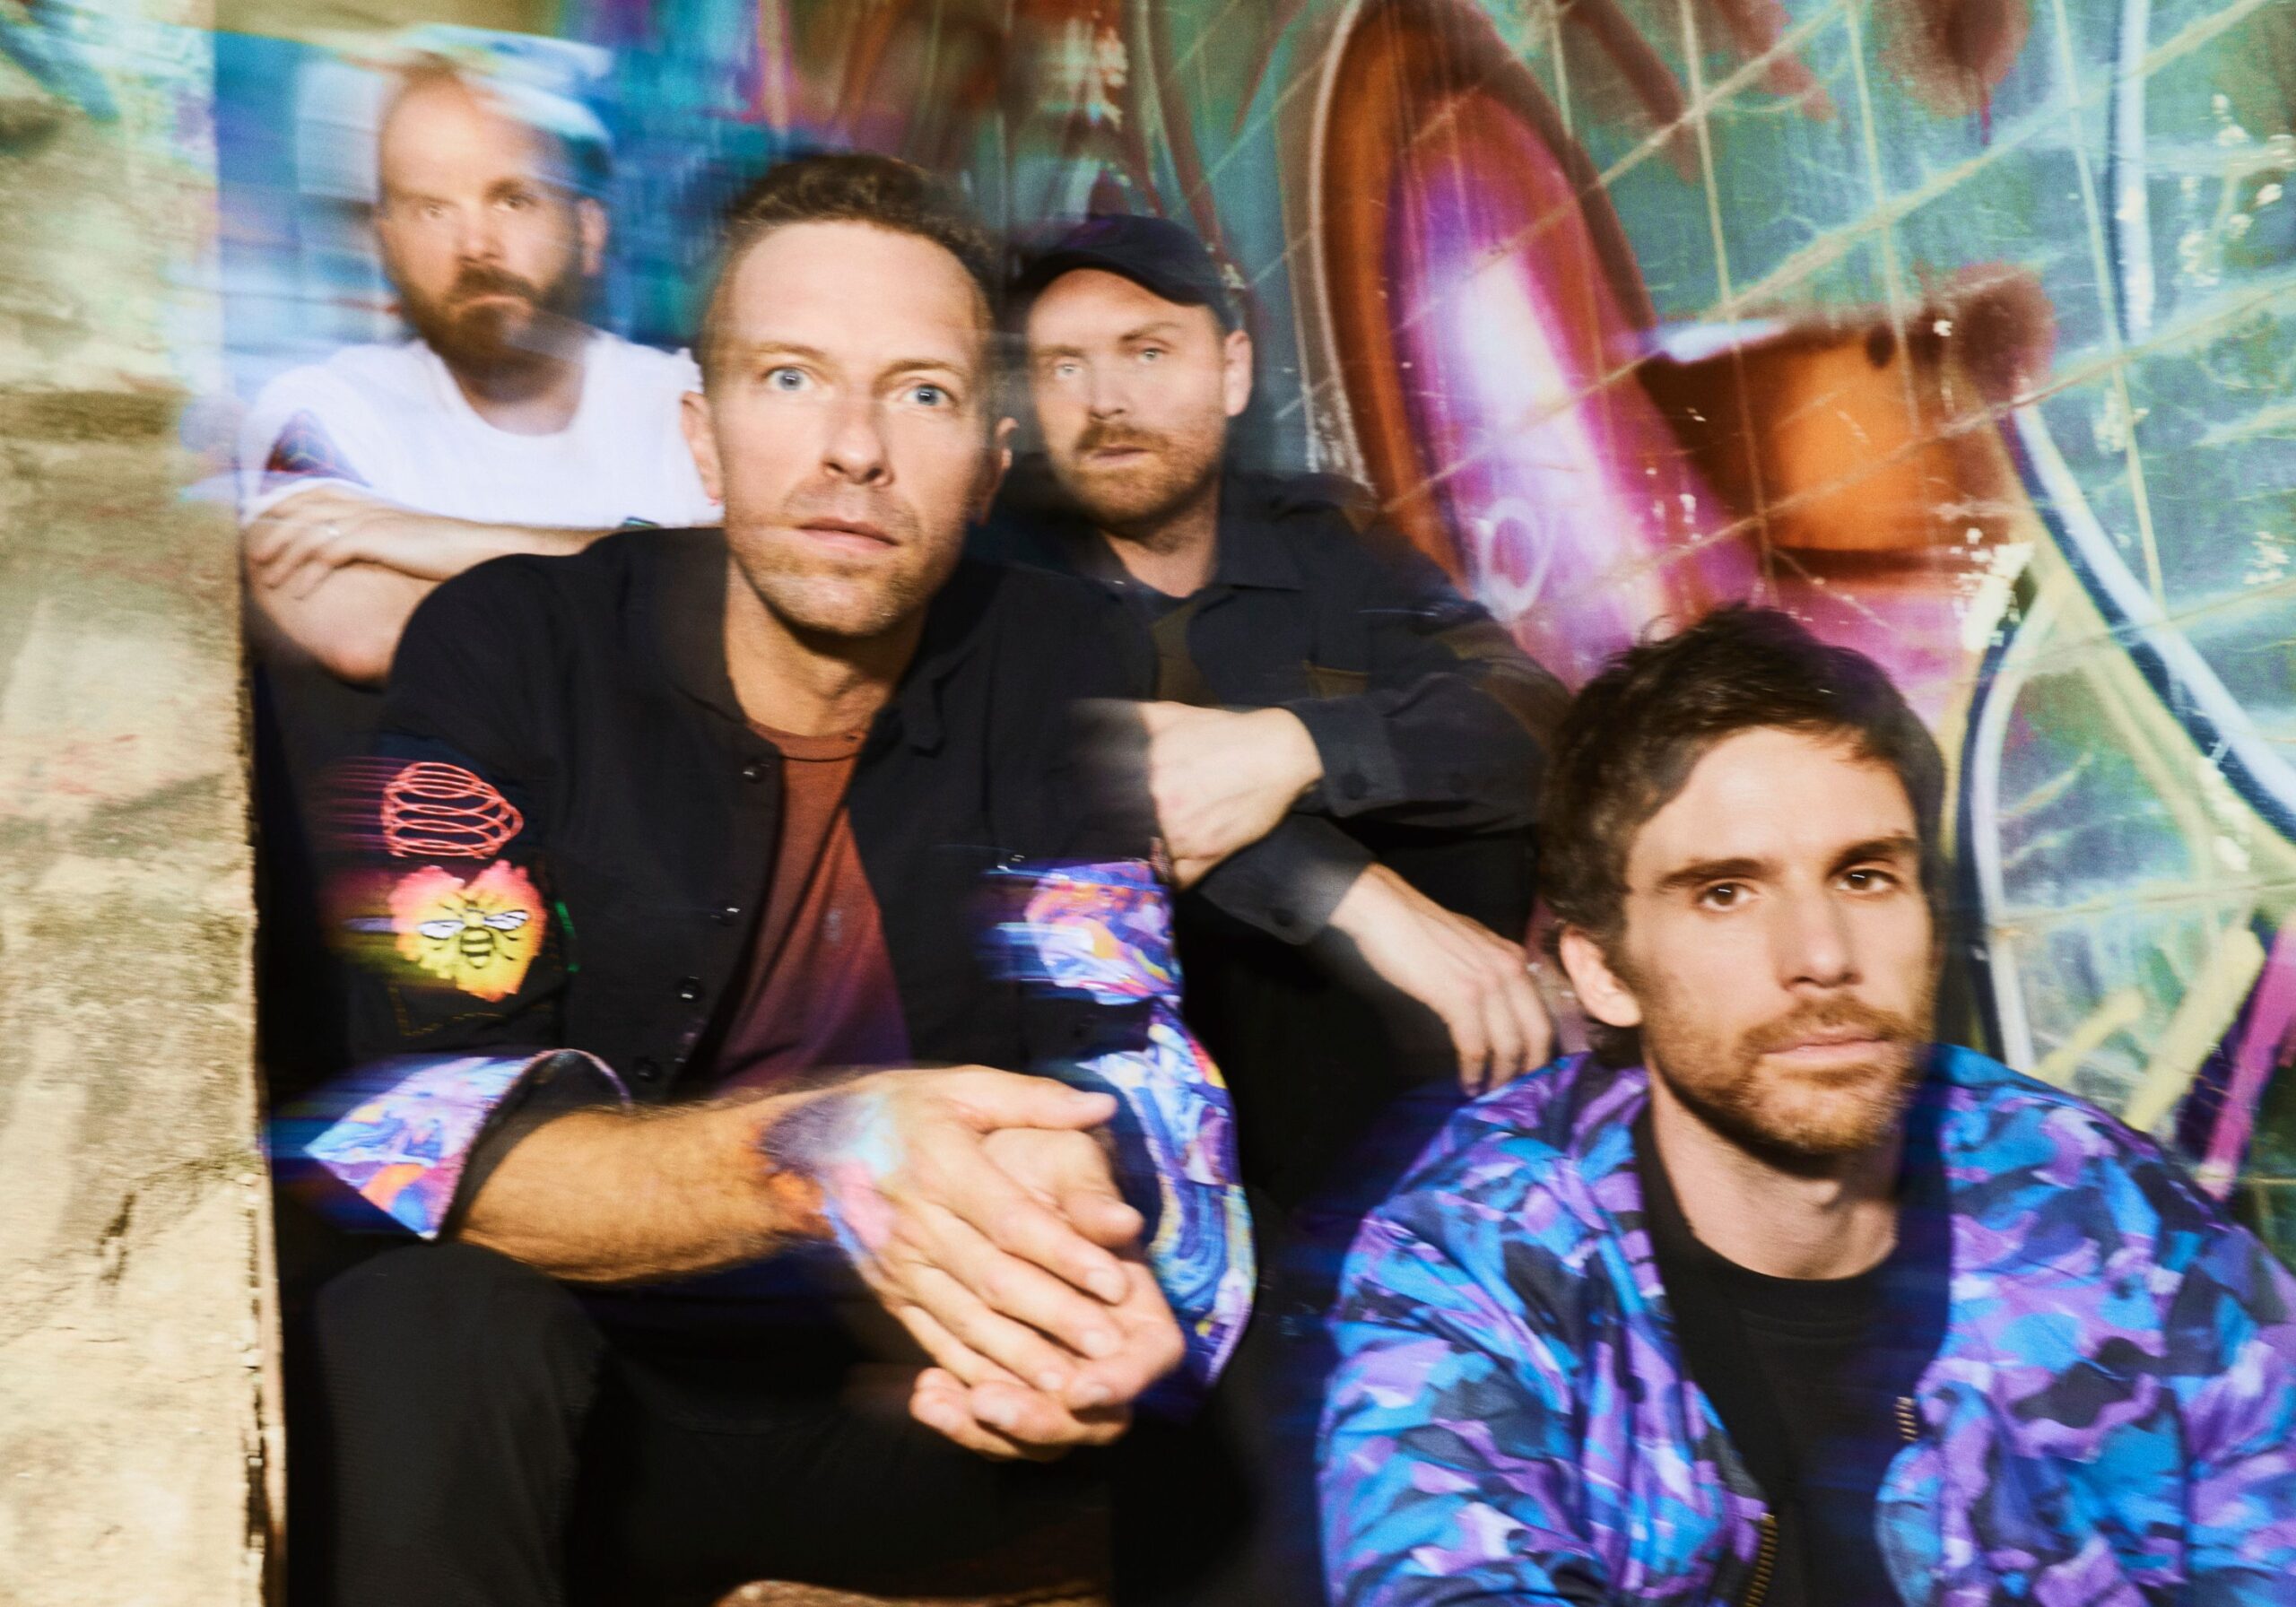 COLDPLAY announce the release of their much-anticipated new album ‘Music Of The Spheres’ 2